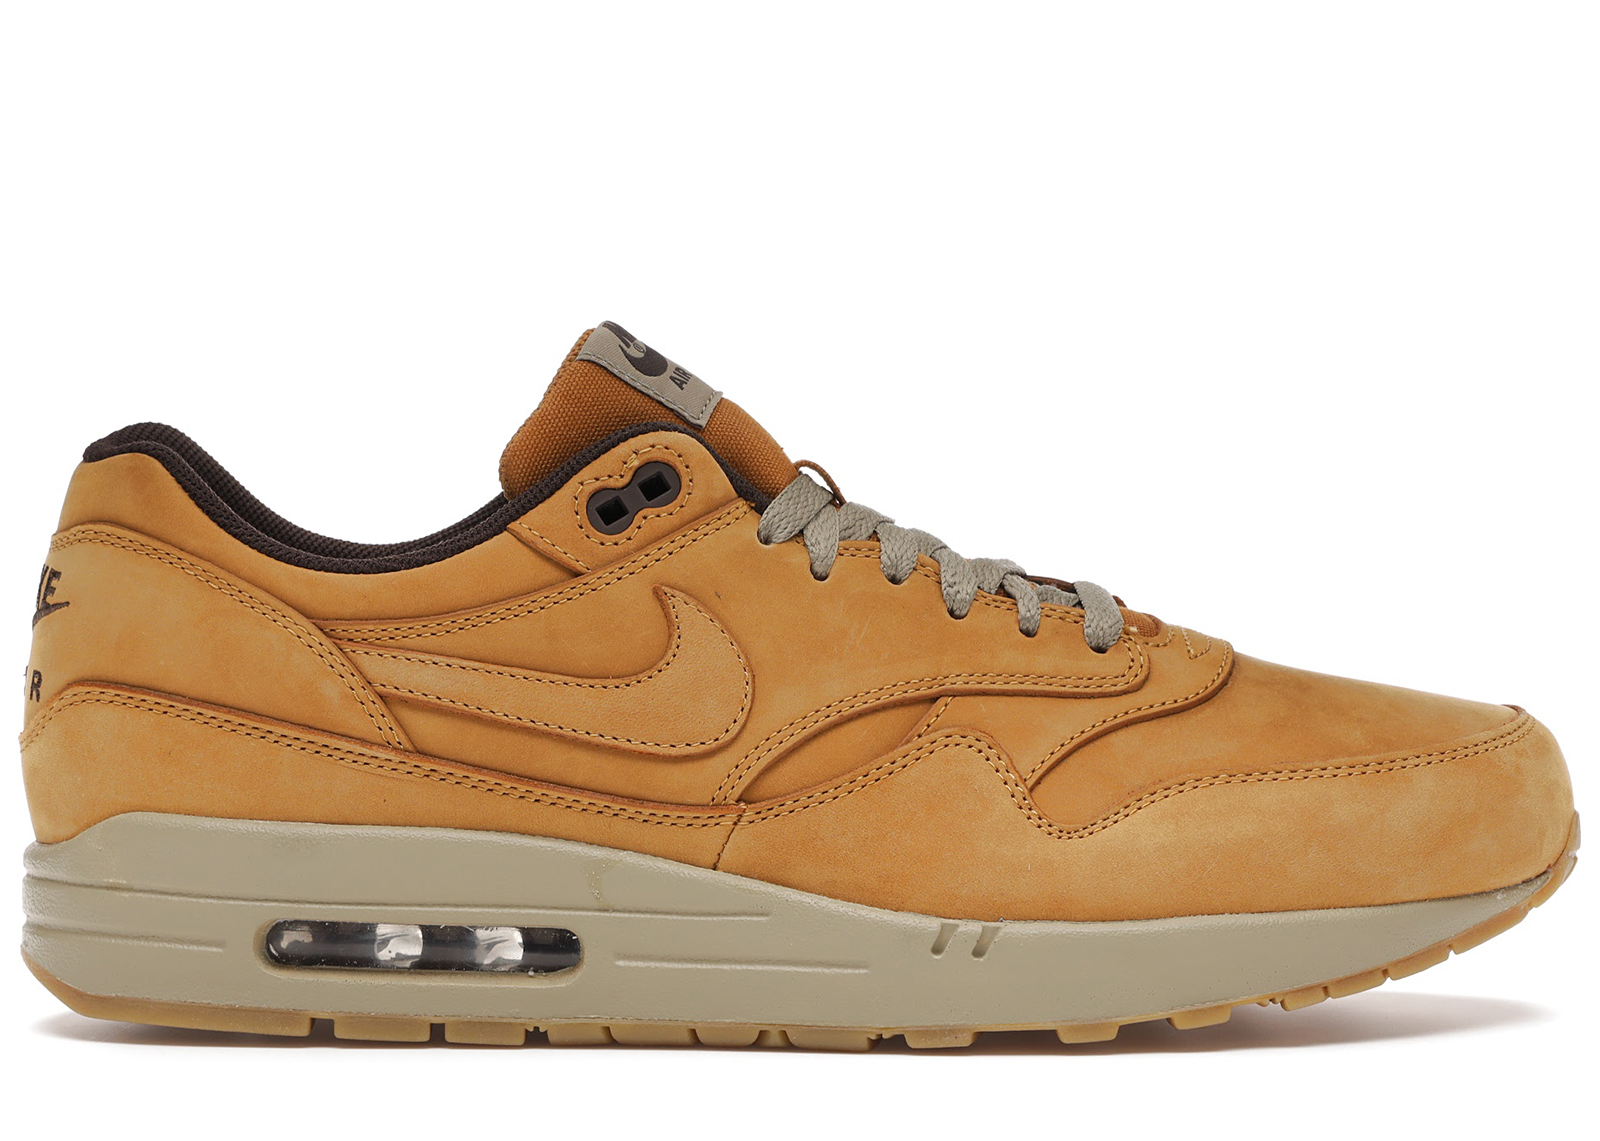 Nike Air Max 1 Wheat Pack 2015 Product